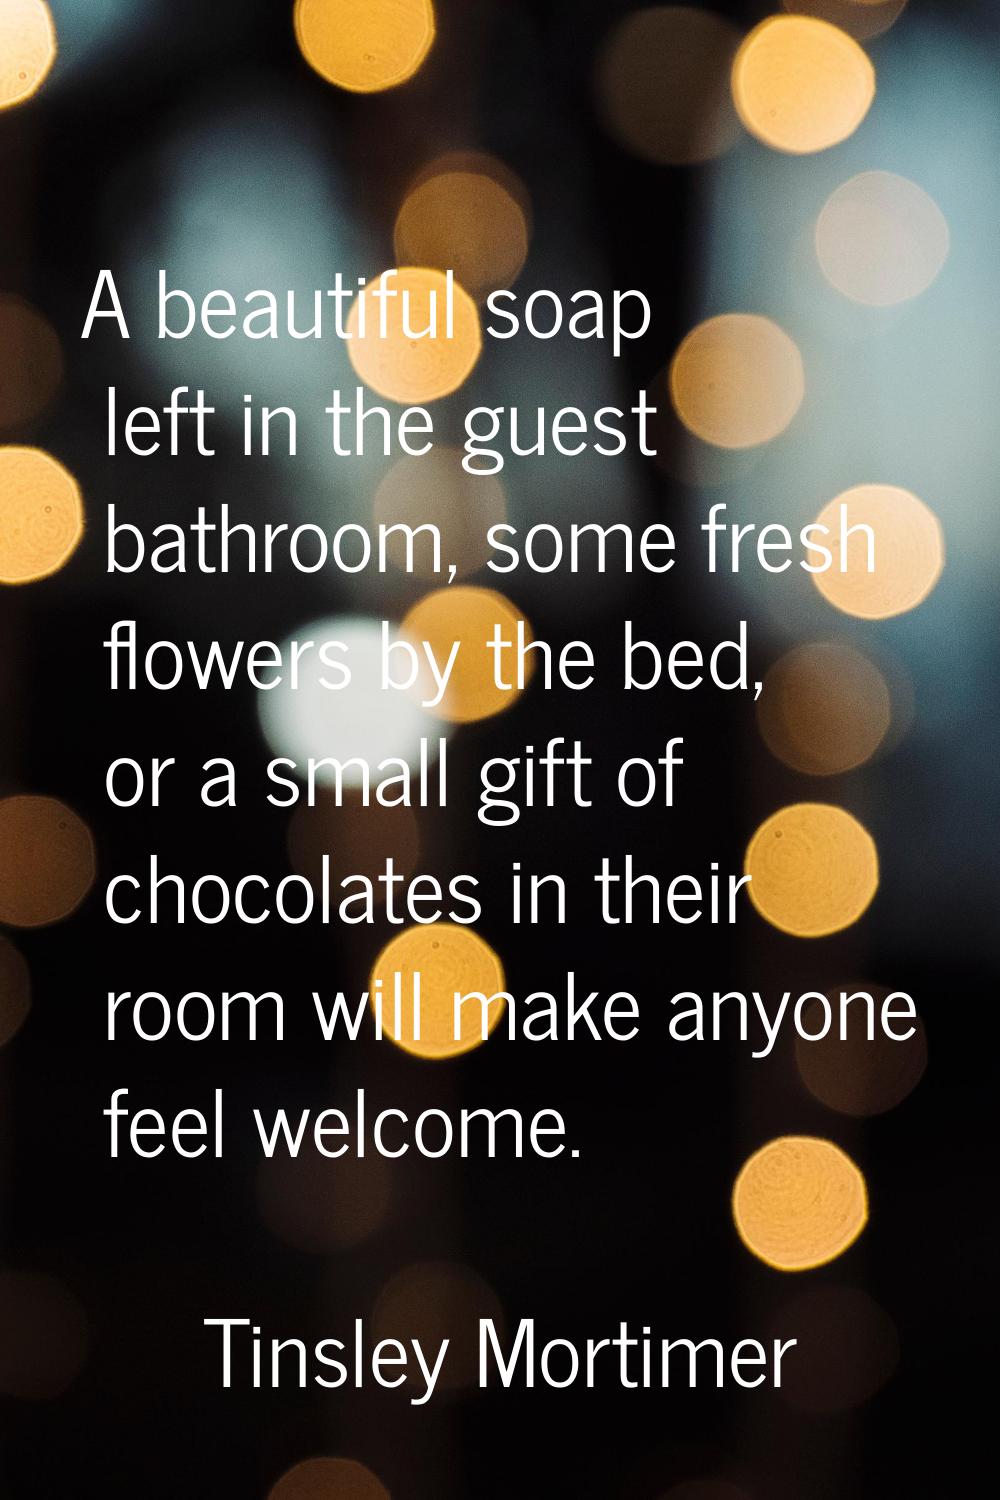 A beautiful soap left in the guest bathroom, some fresh flowers by the bed, or a small gift of choc